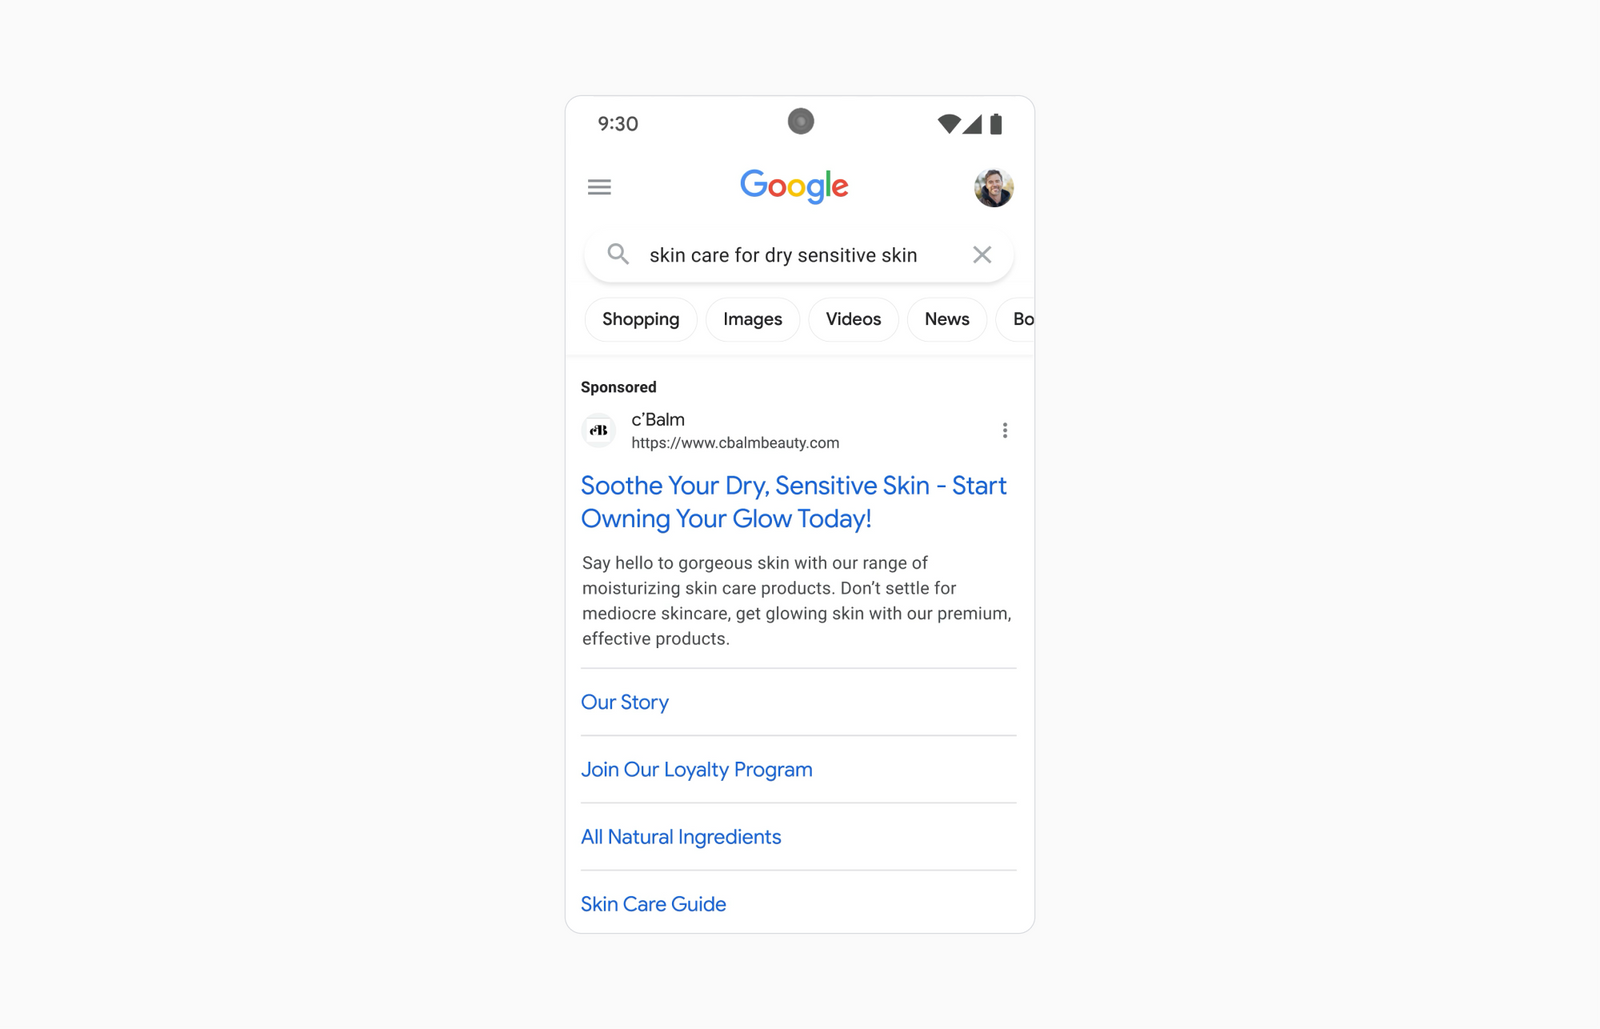 A preview snapshot of Google's new ACA product shows a mobile phone surfacing a answers to a query about dry, sensitive skin.